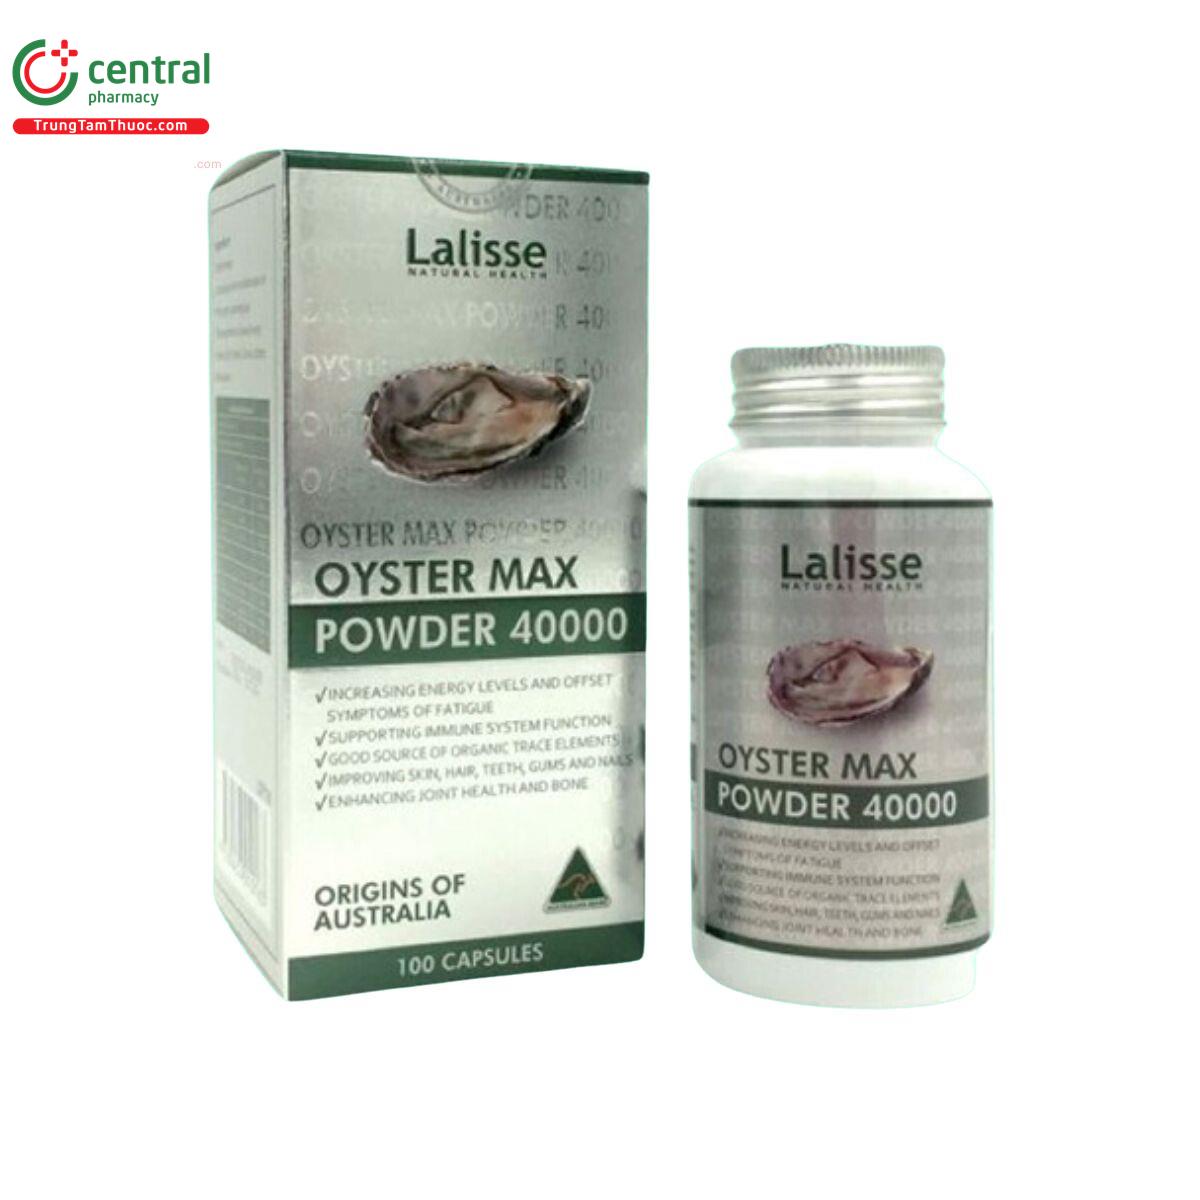 lalisse oyster max powder 40000 1 O5326